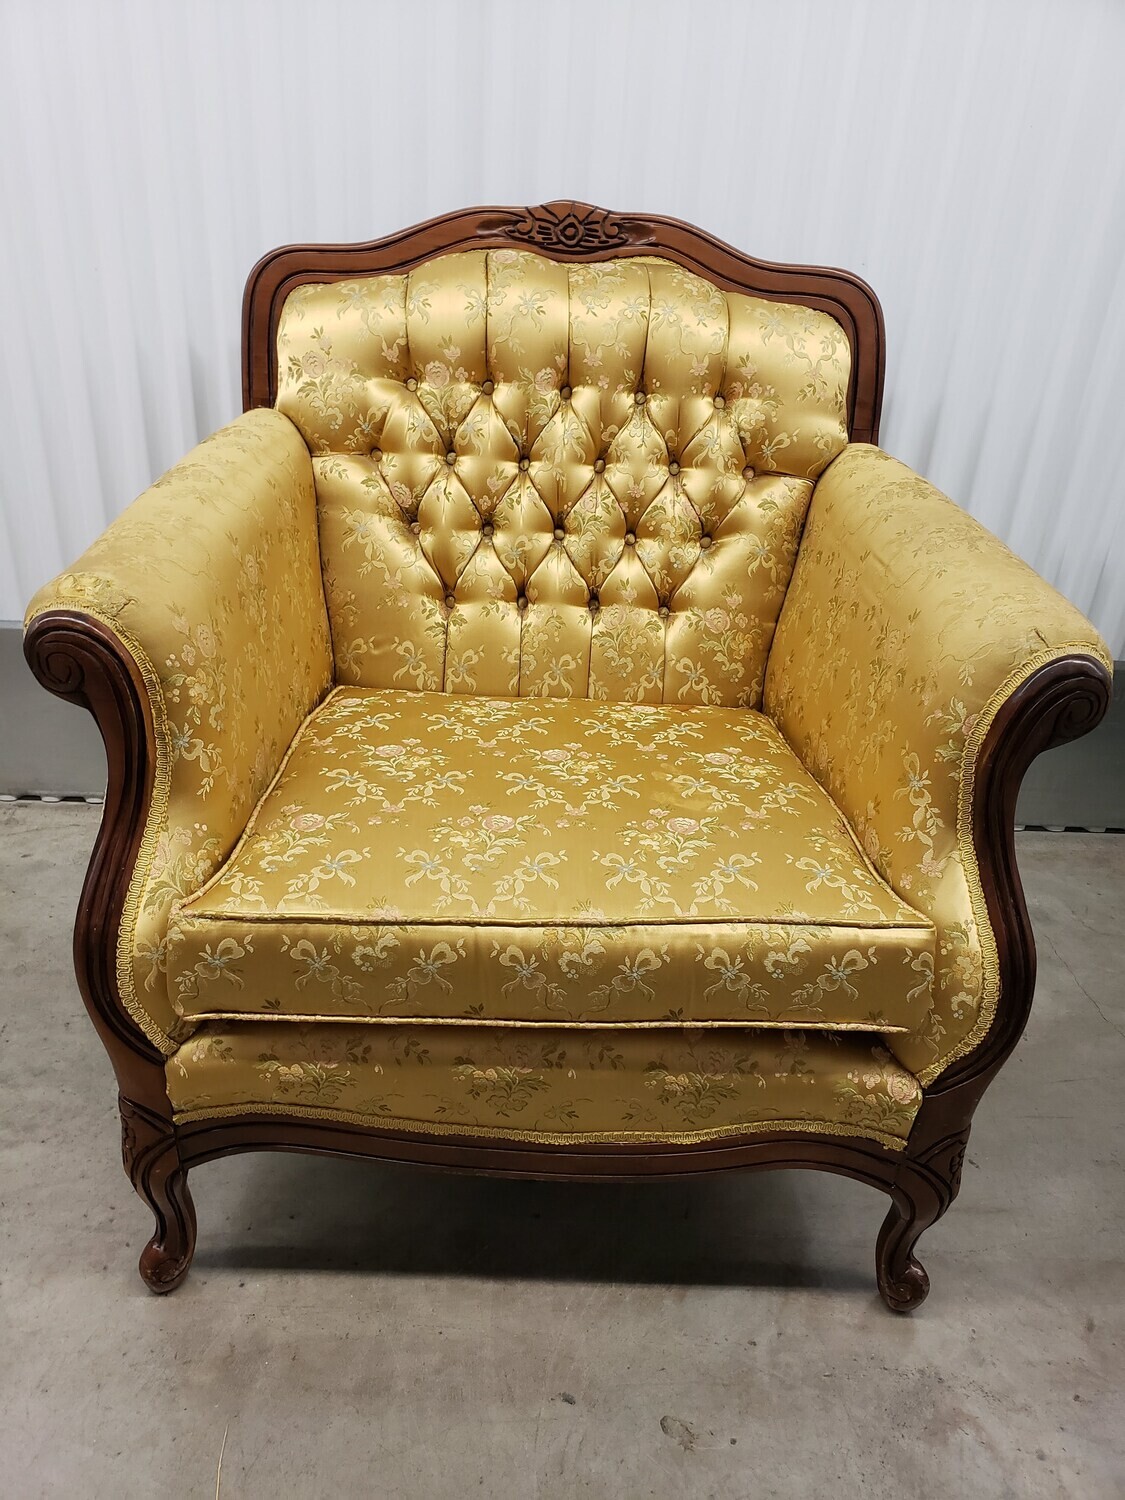 Gold Arm Chair with antique look #2118